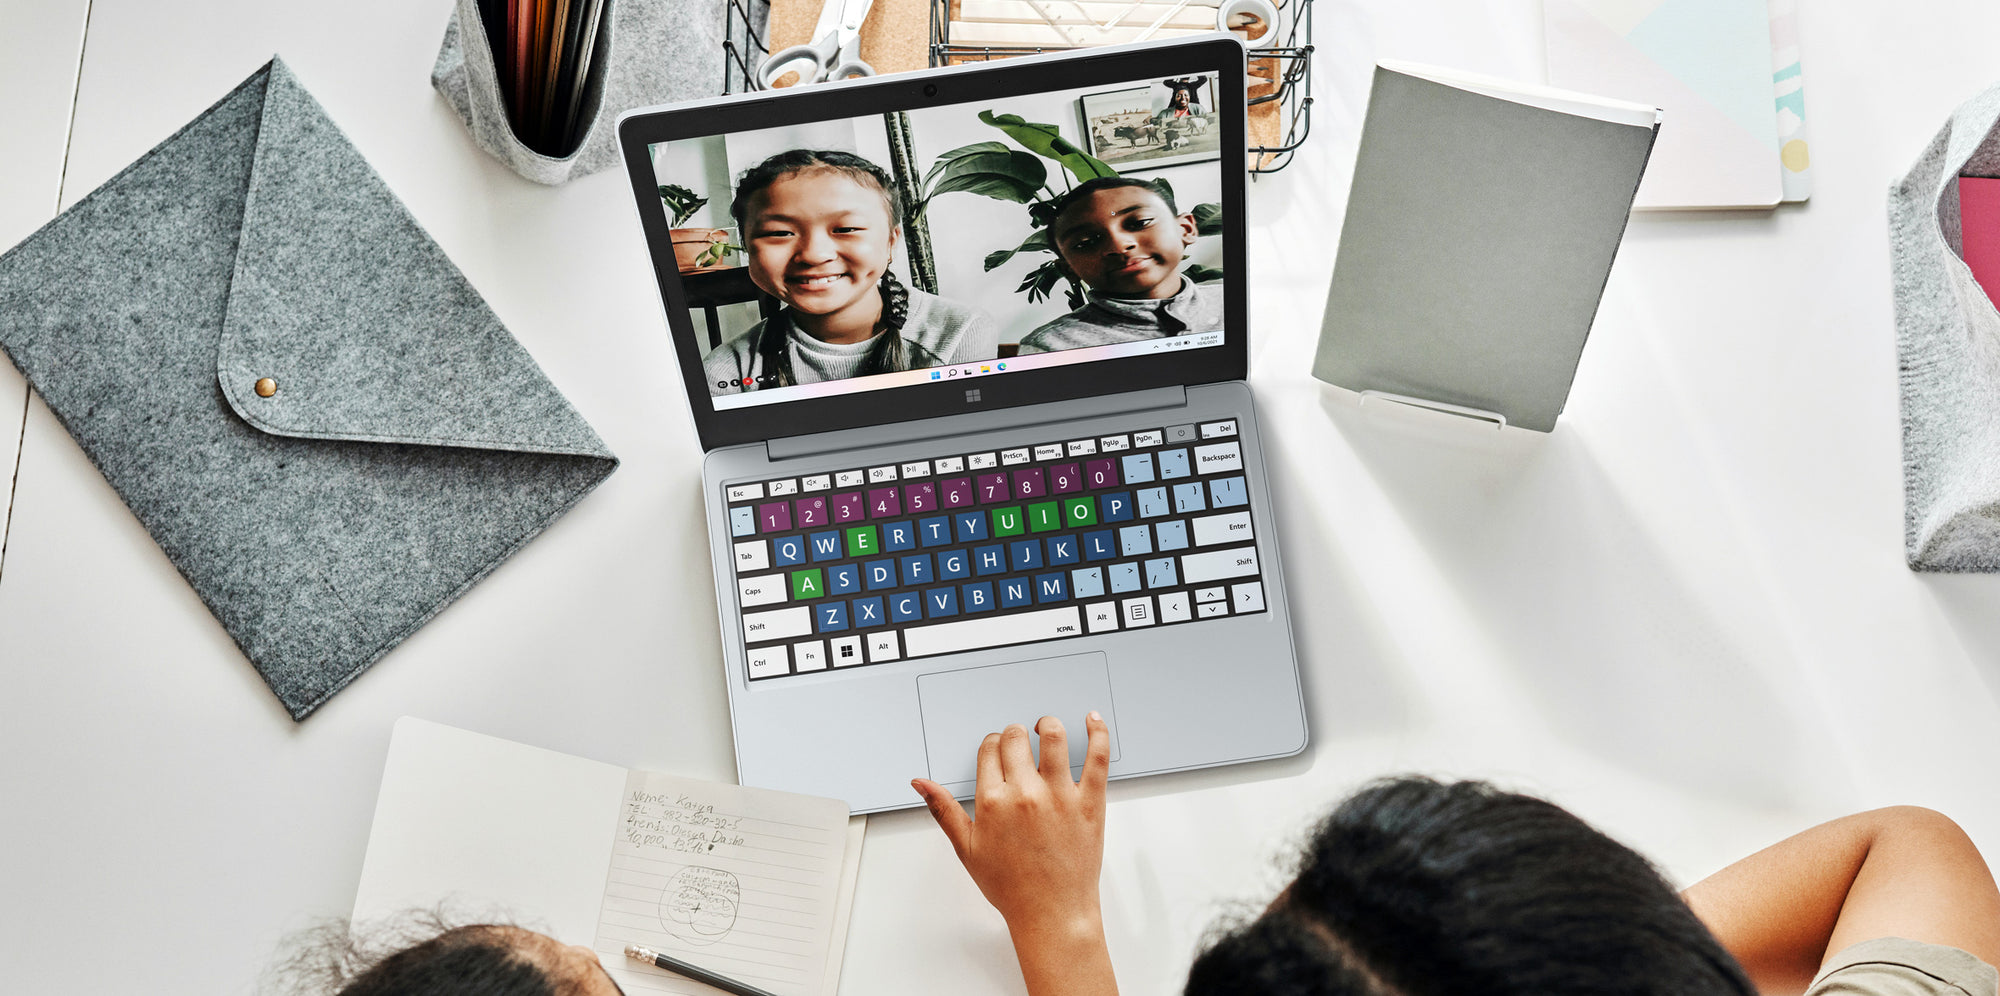 JCPal introduces the VerSkin Inclusive Keyboard Protector, designed in collaboration with the Microsoft Devices Accessibility Team